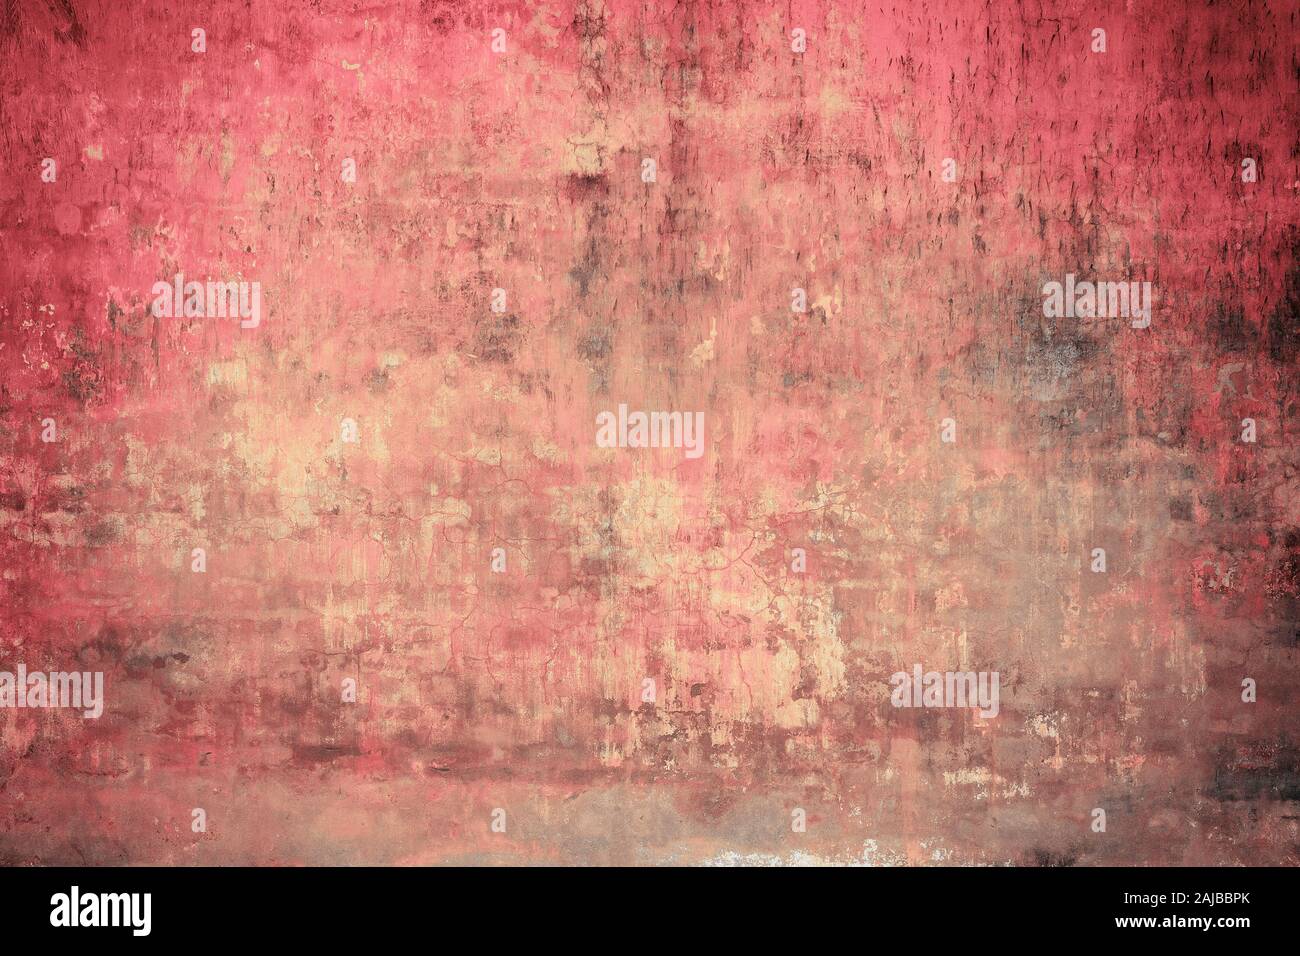 Real wall background, pink grungy texture. Stock Photo